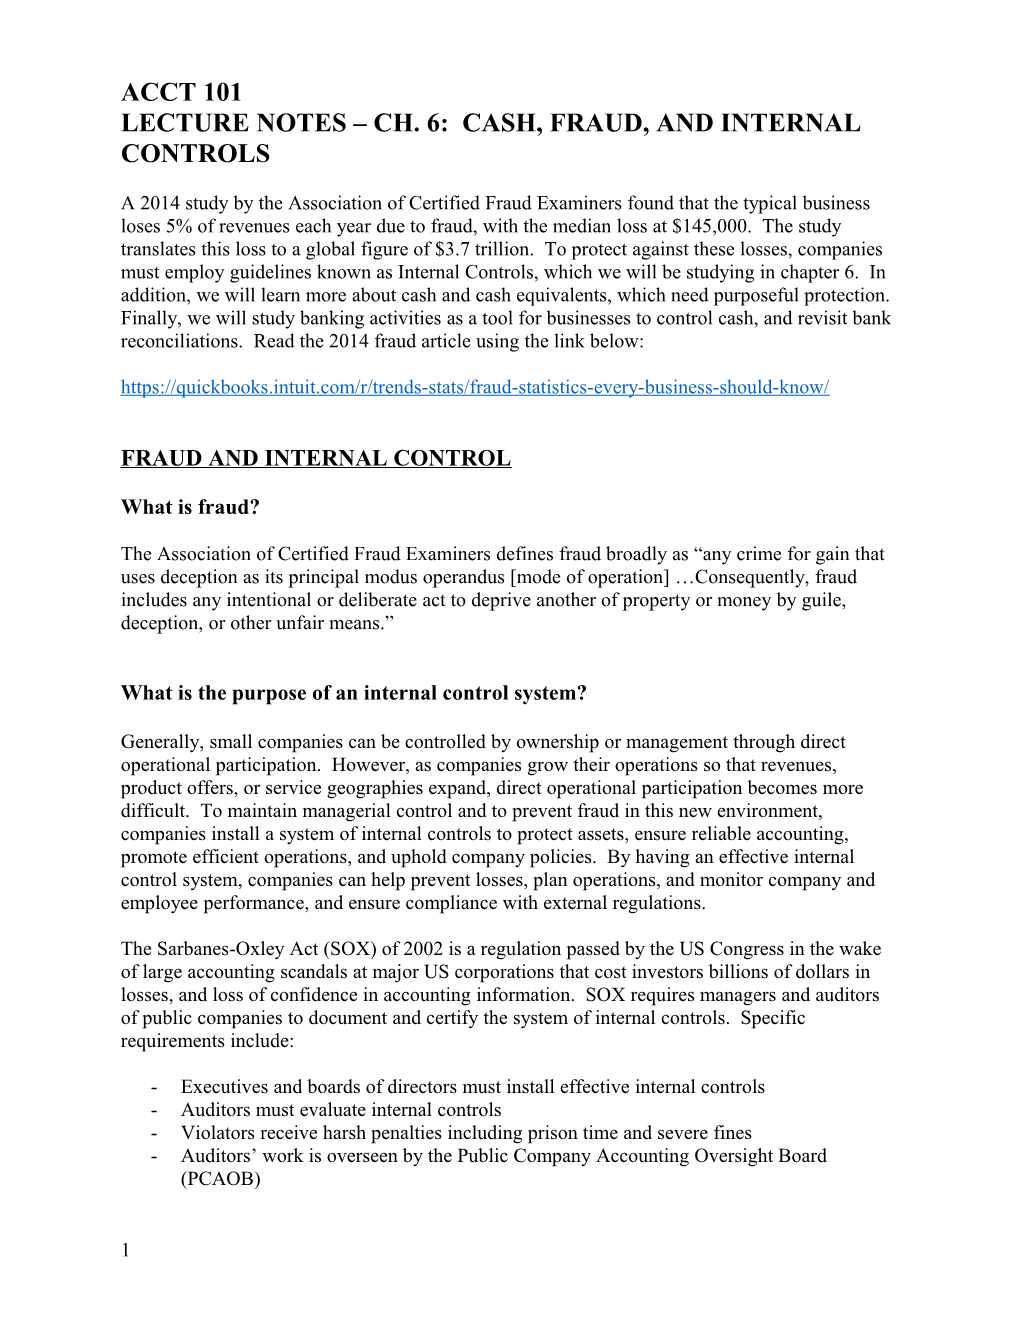 Lecture Notes Ch. 6: Cash, Fraud, and Internal Controls